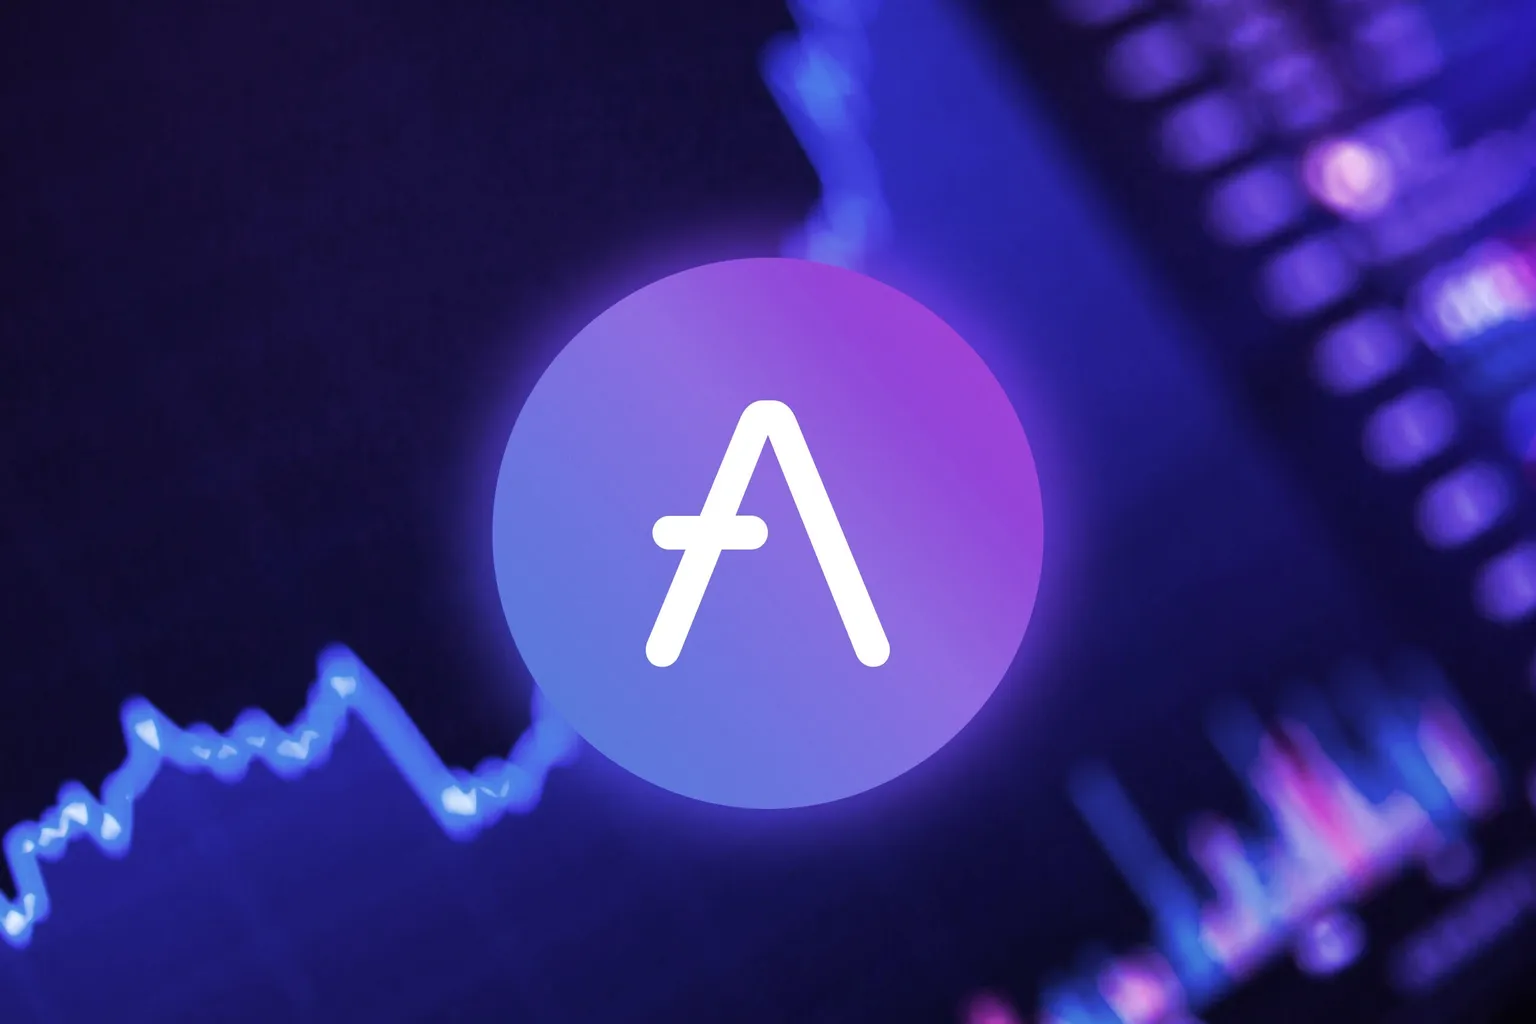 The price of AAVE is on the rise. Image: Shutterstock.